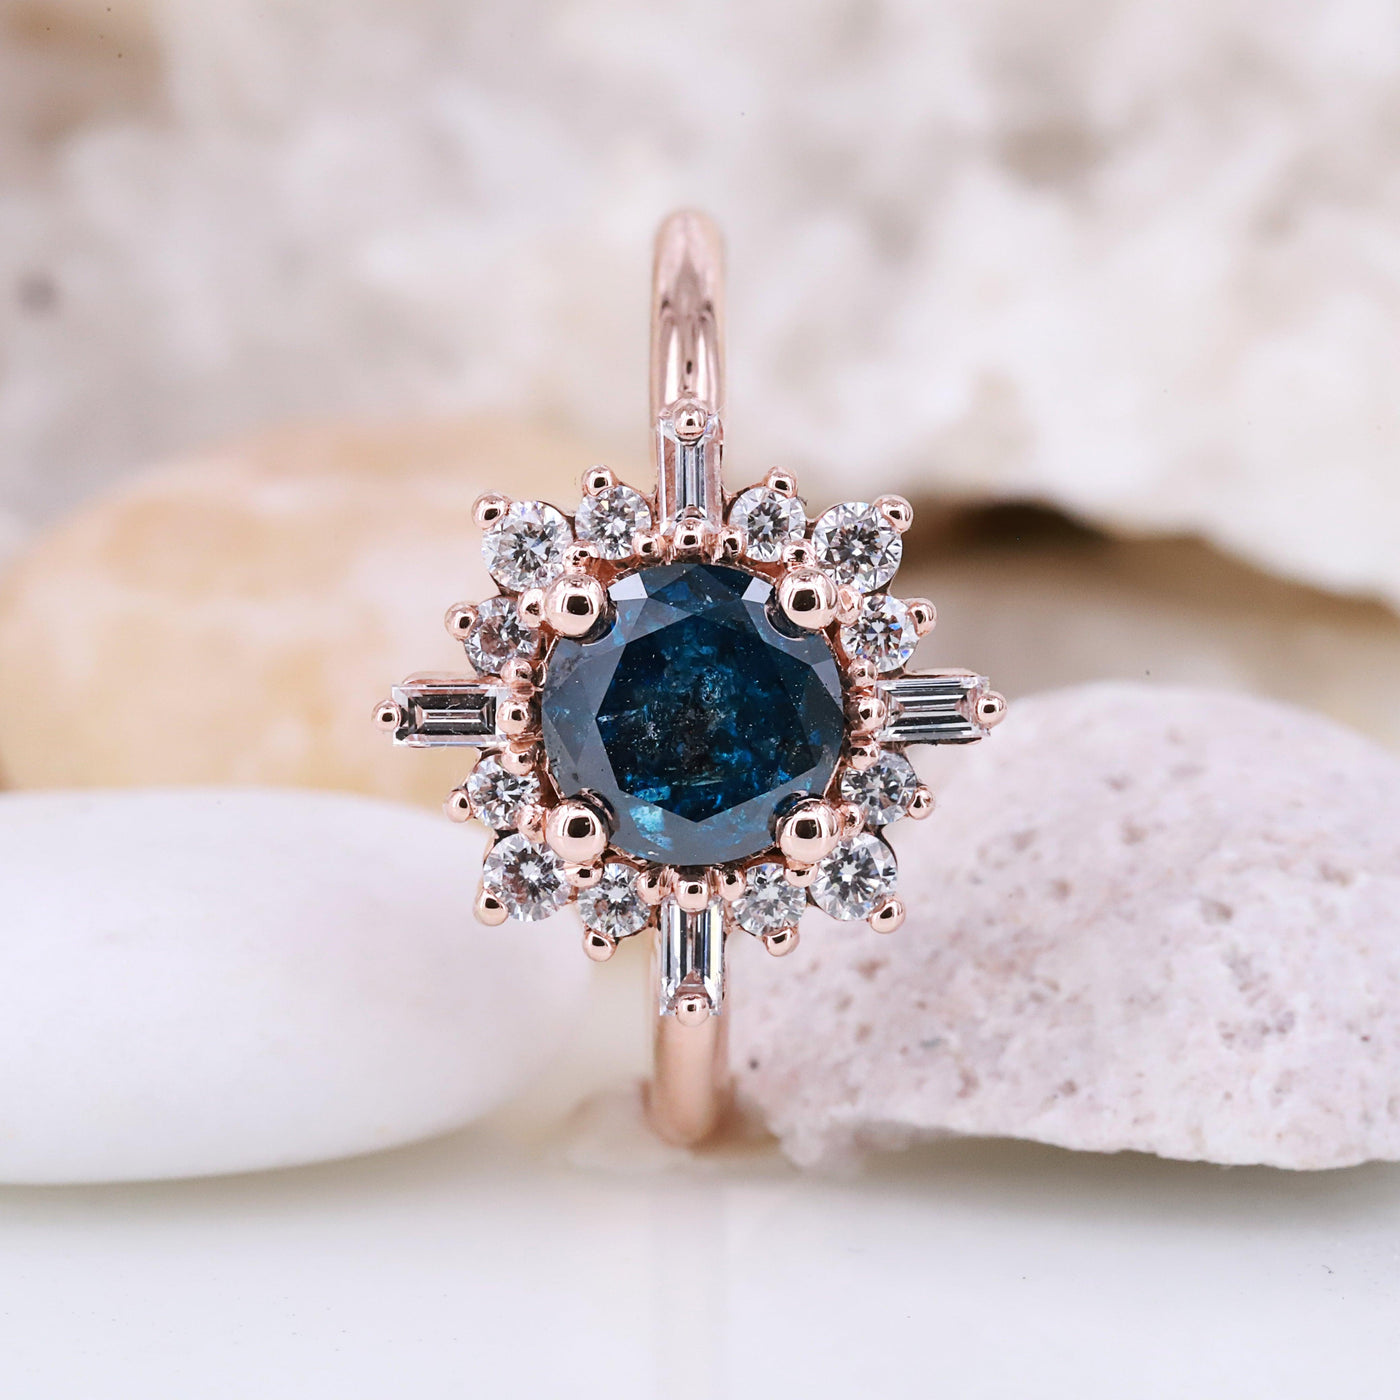 Sparkling Blue Round Diamond Ring - Find Your Perfect Match Today | Shop Now and Add Some Color to Your Life! Ethically-sourced diamond ring